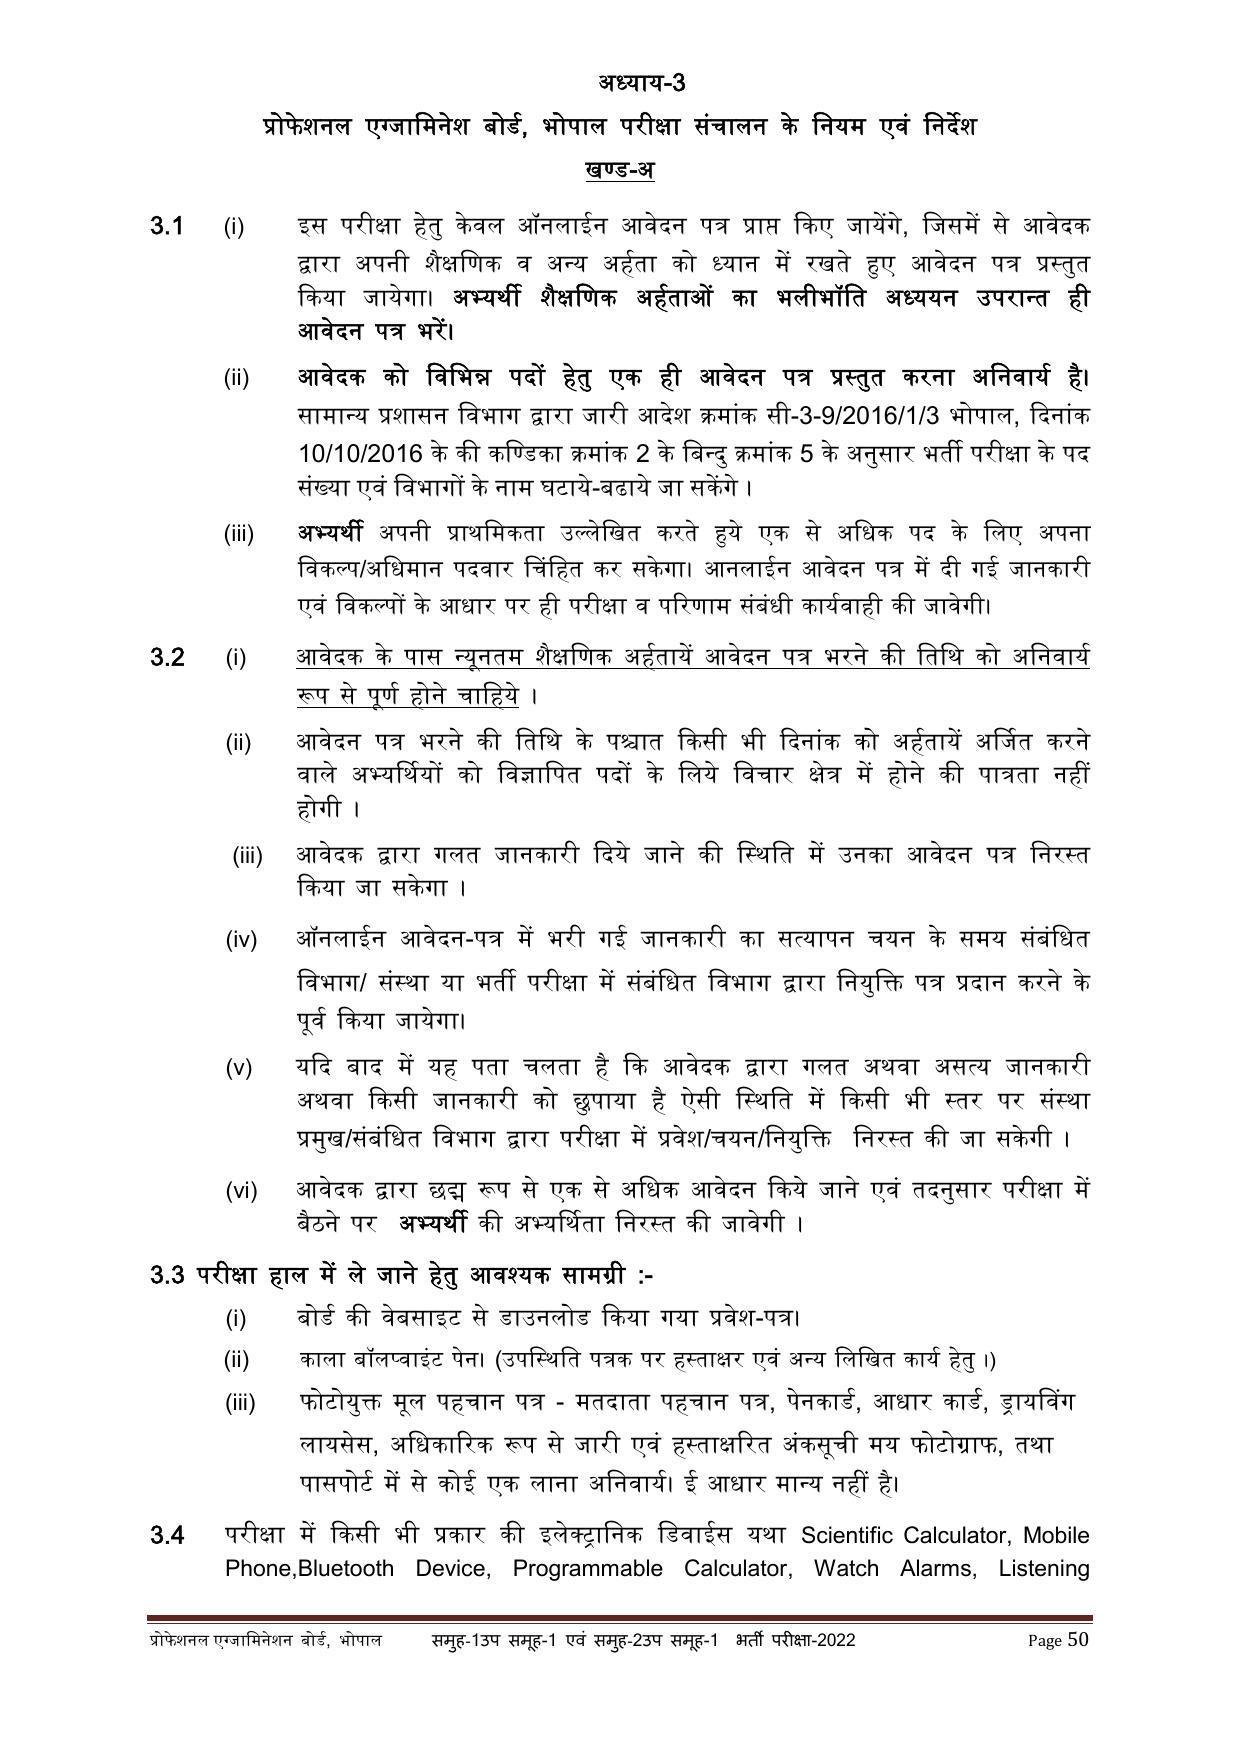 MPPEB Group-I Sub Group-I & Group-II Sub Group-I Recruitment 2022 - Page 67